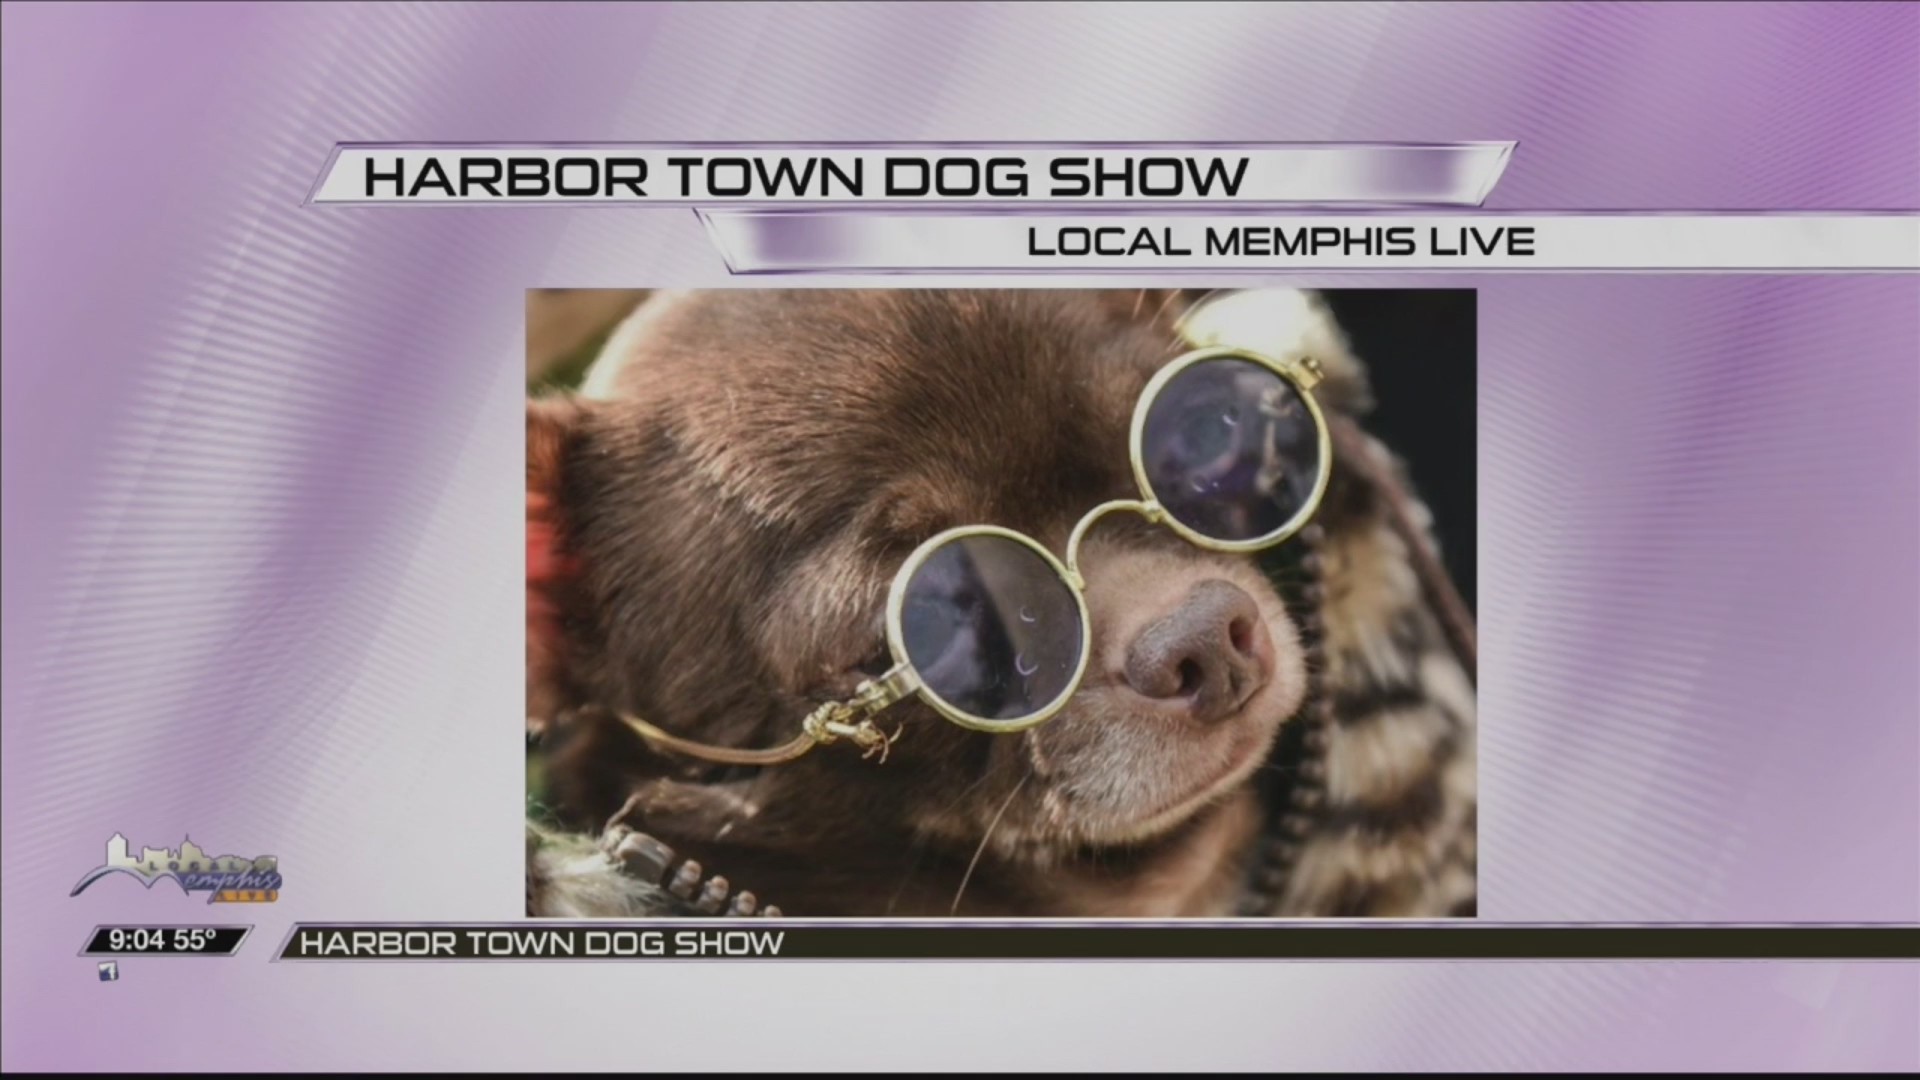 HARBOR TOWN DOG SHOW